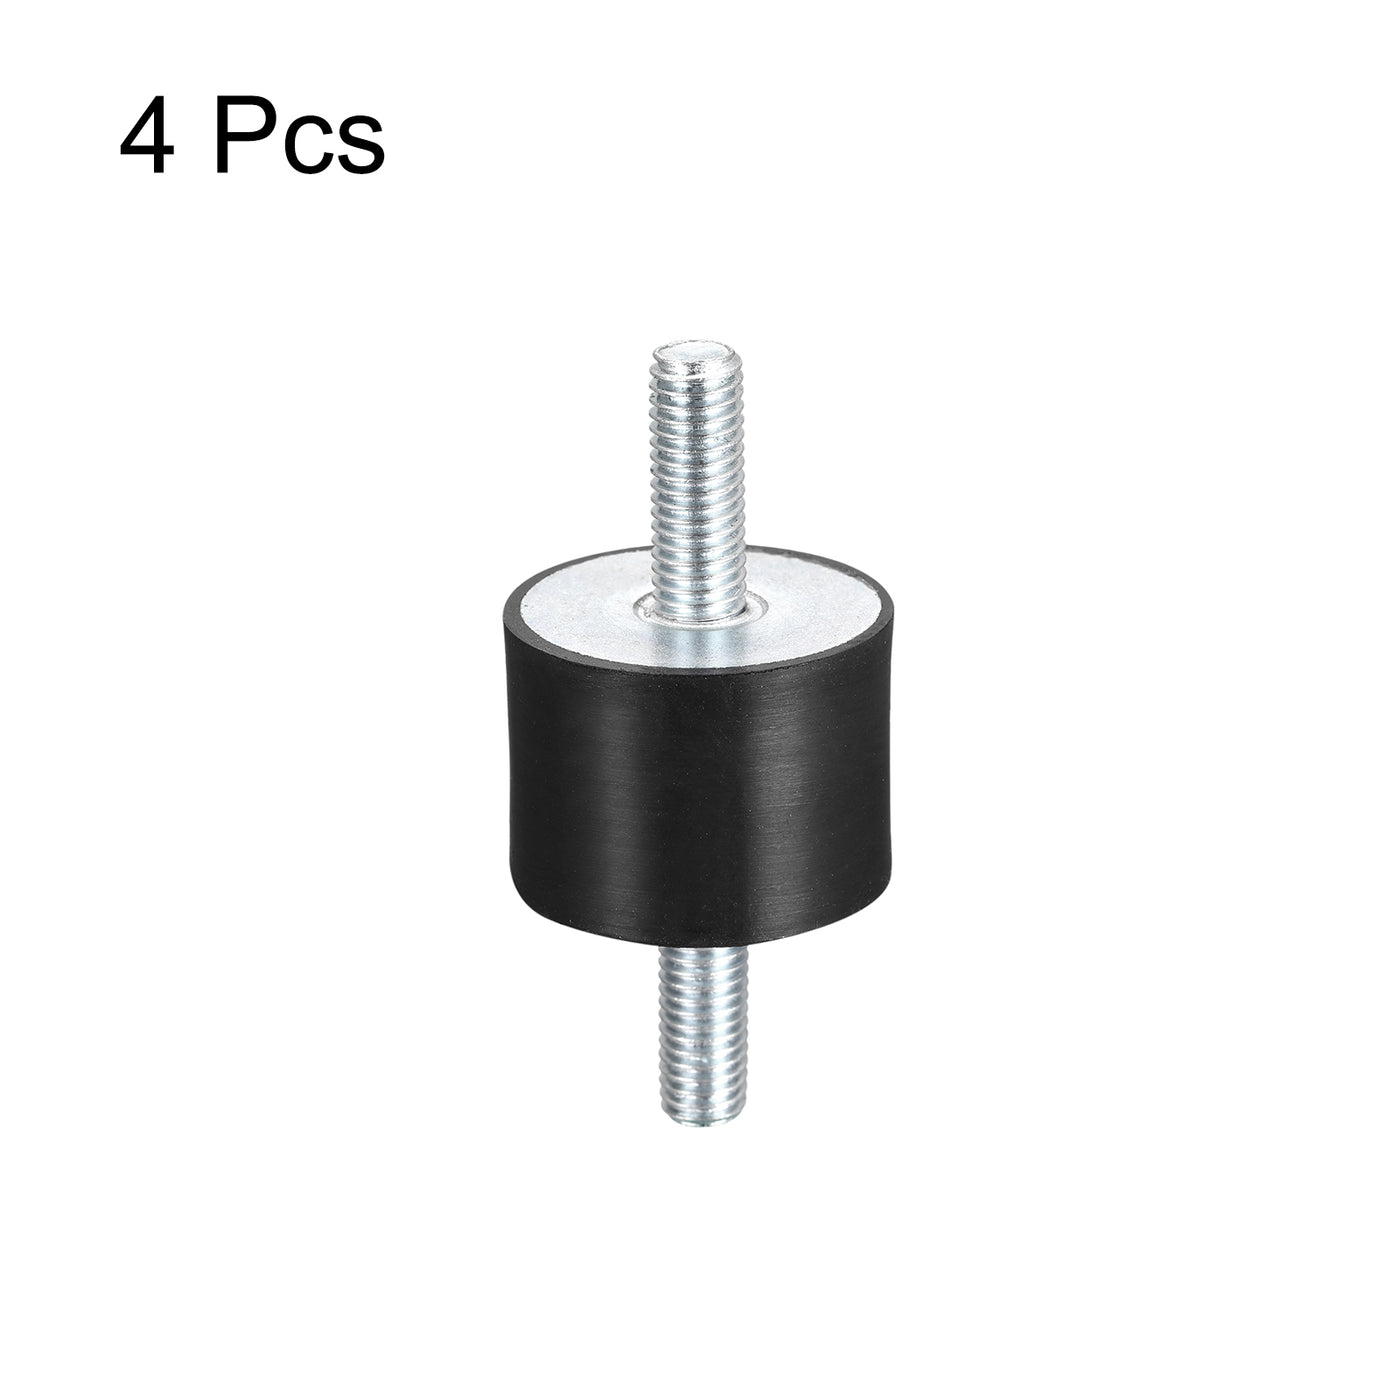 uxcell Uxcell Rubber Mounts 4pcs M10x28mm Male Vibration Isolator Shock Absorber D40mmxH30mm